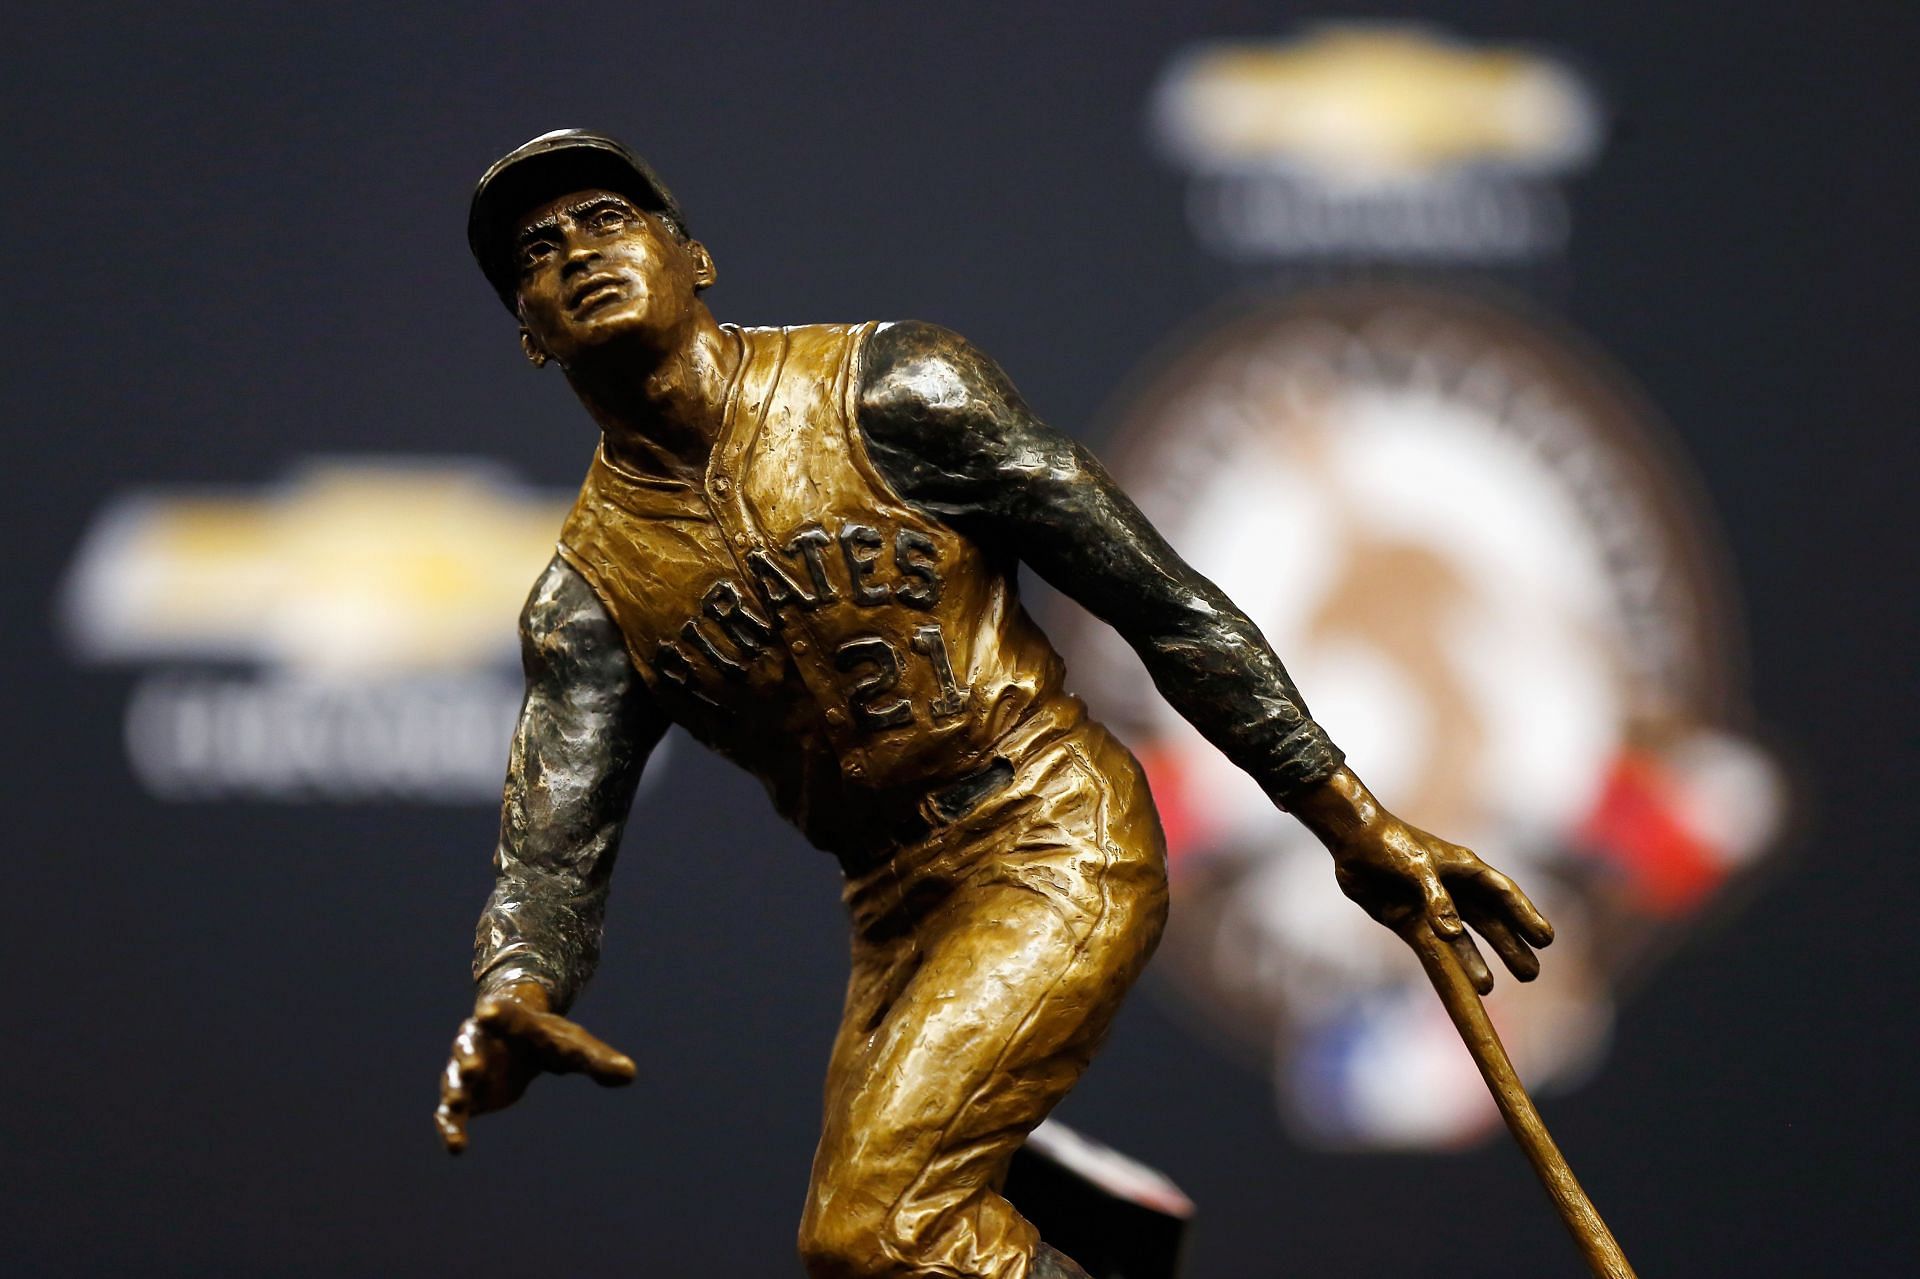 Roberto Clemente remains Latino legend 50 years after death